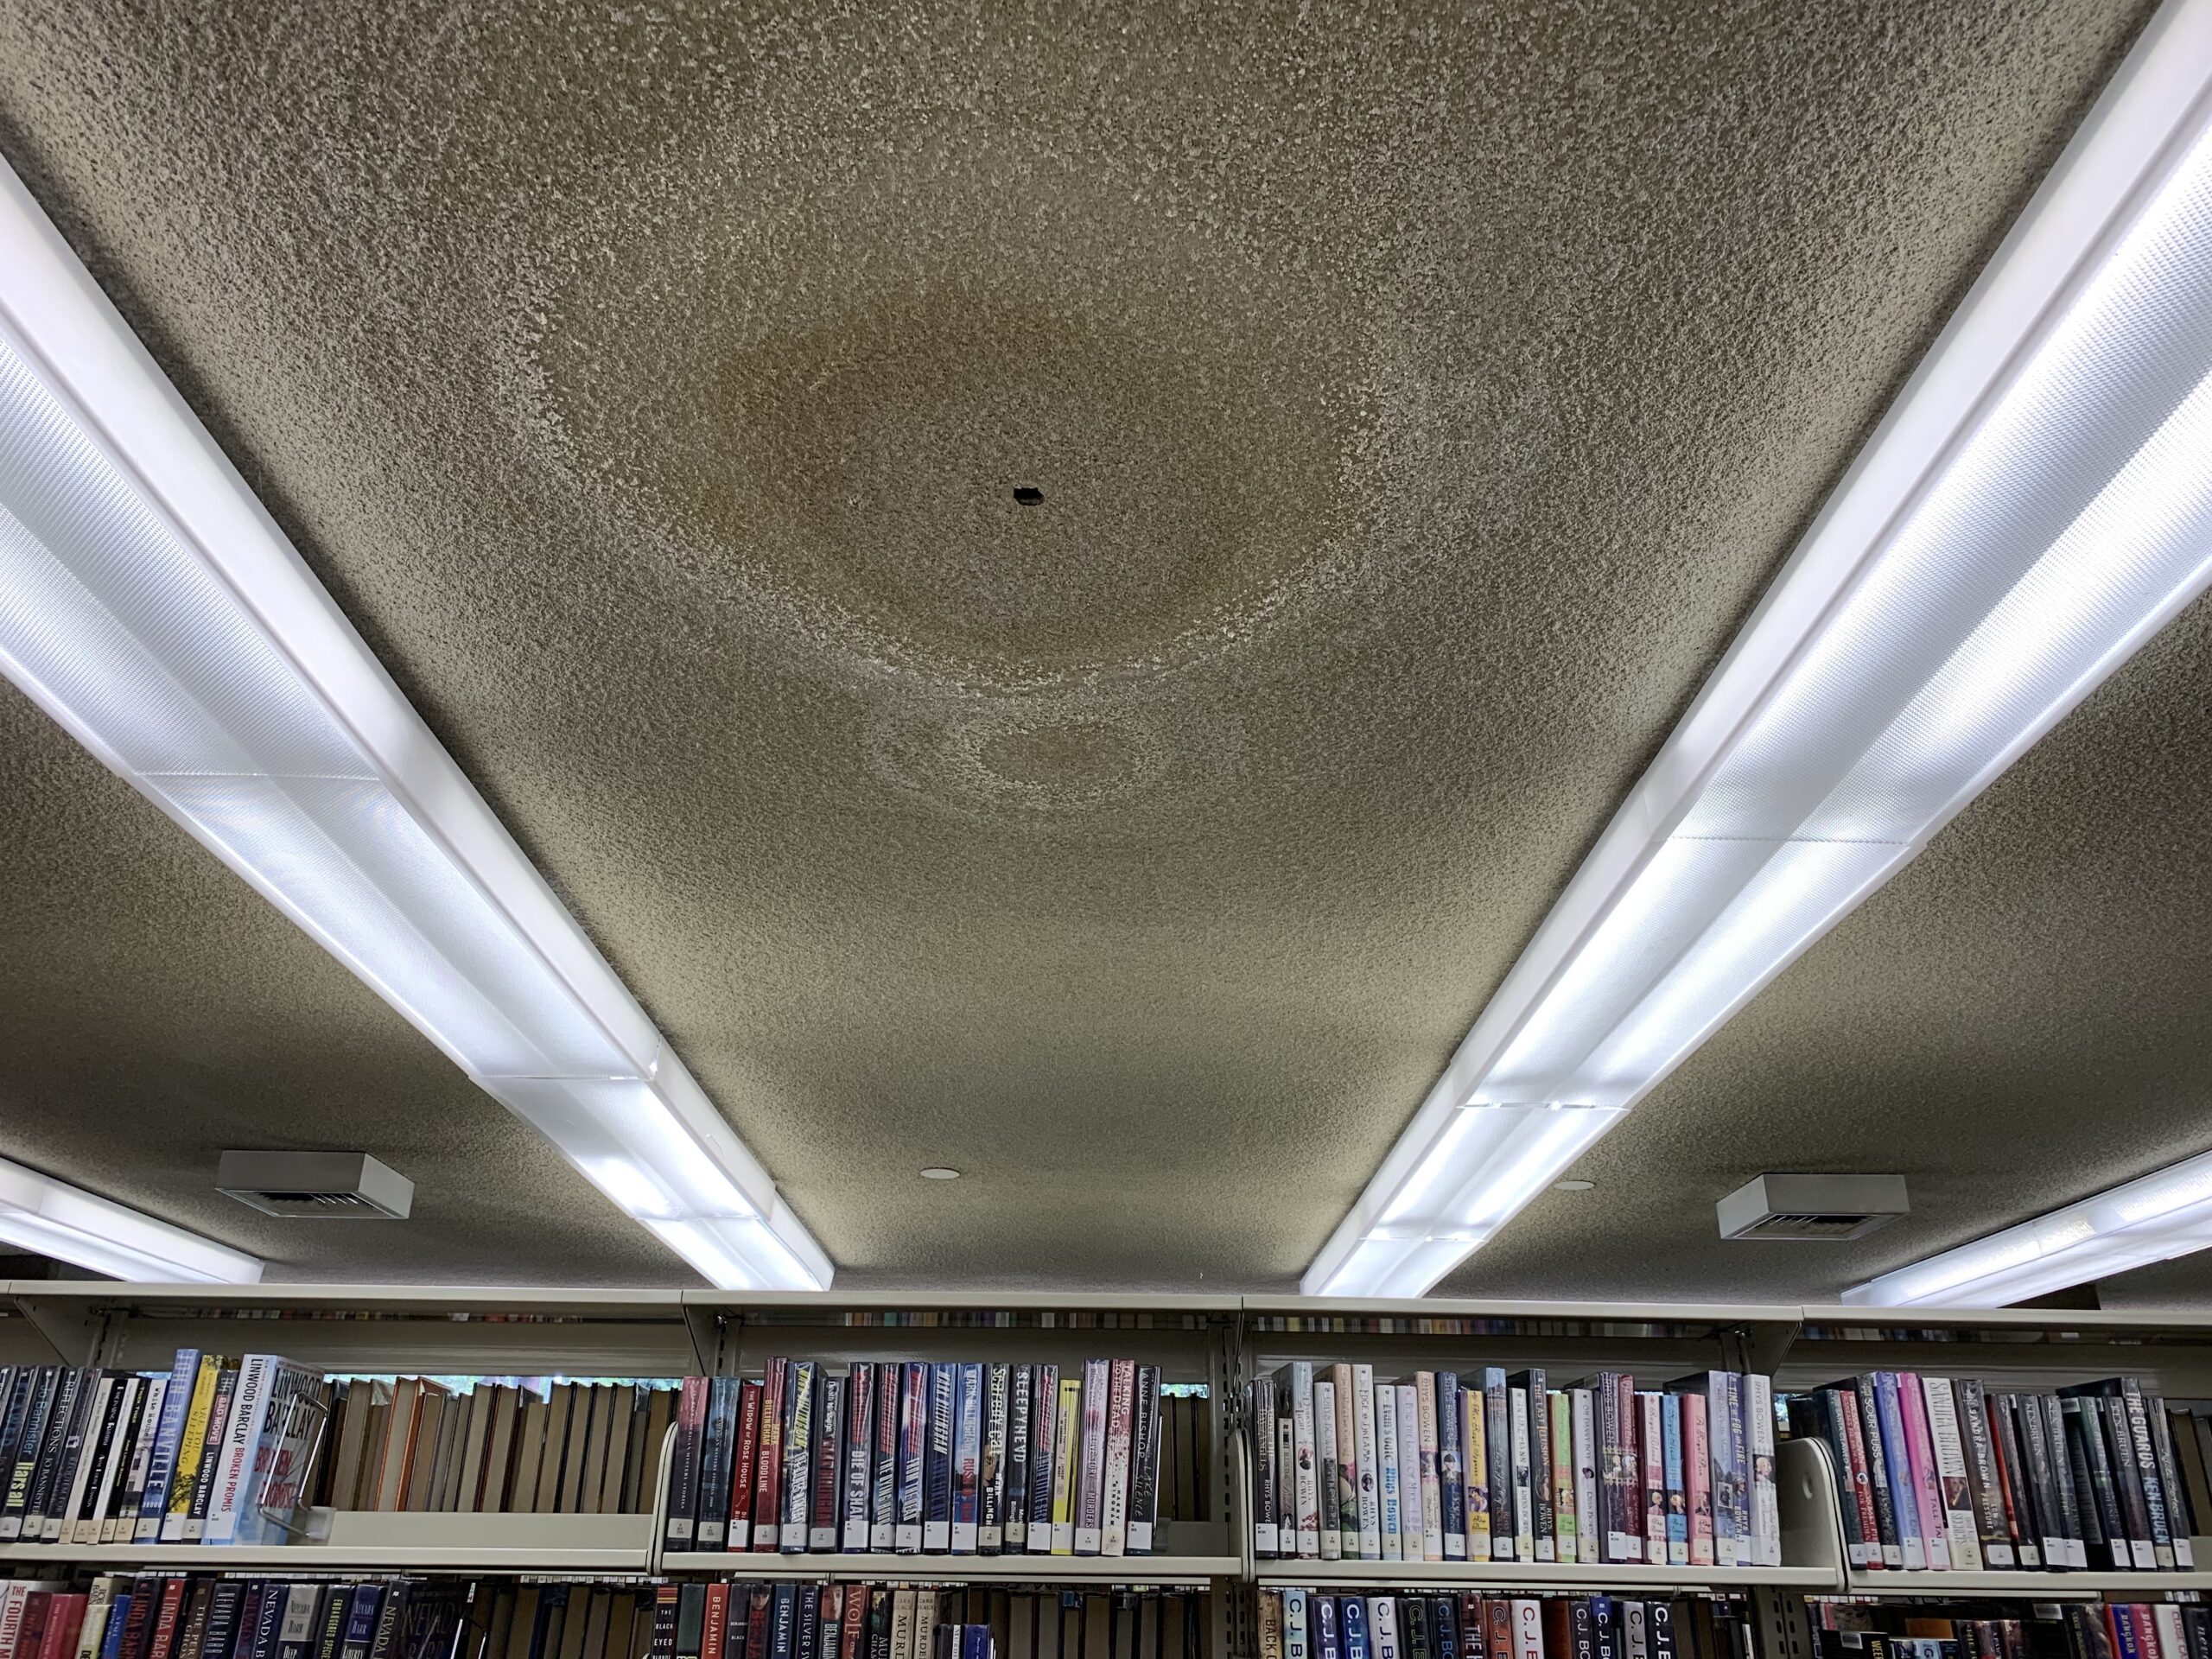 Water damage and hole in ceiling in Adult section at Main Library